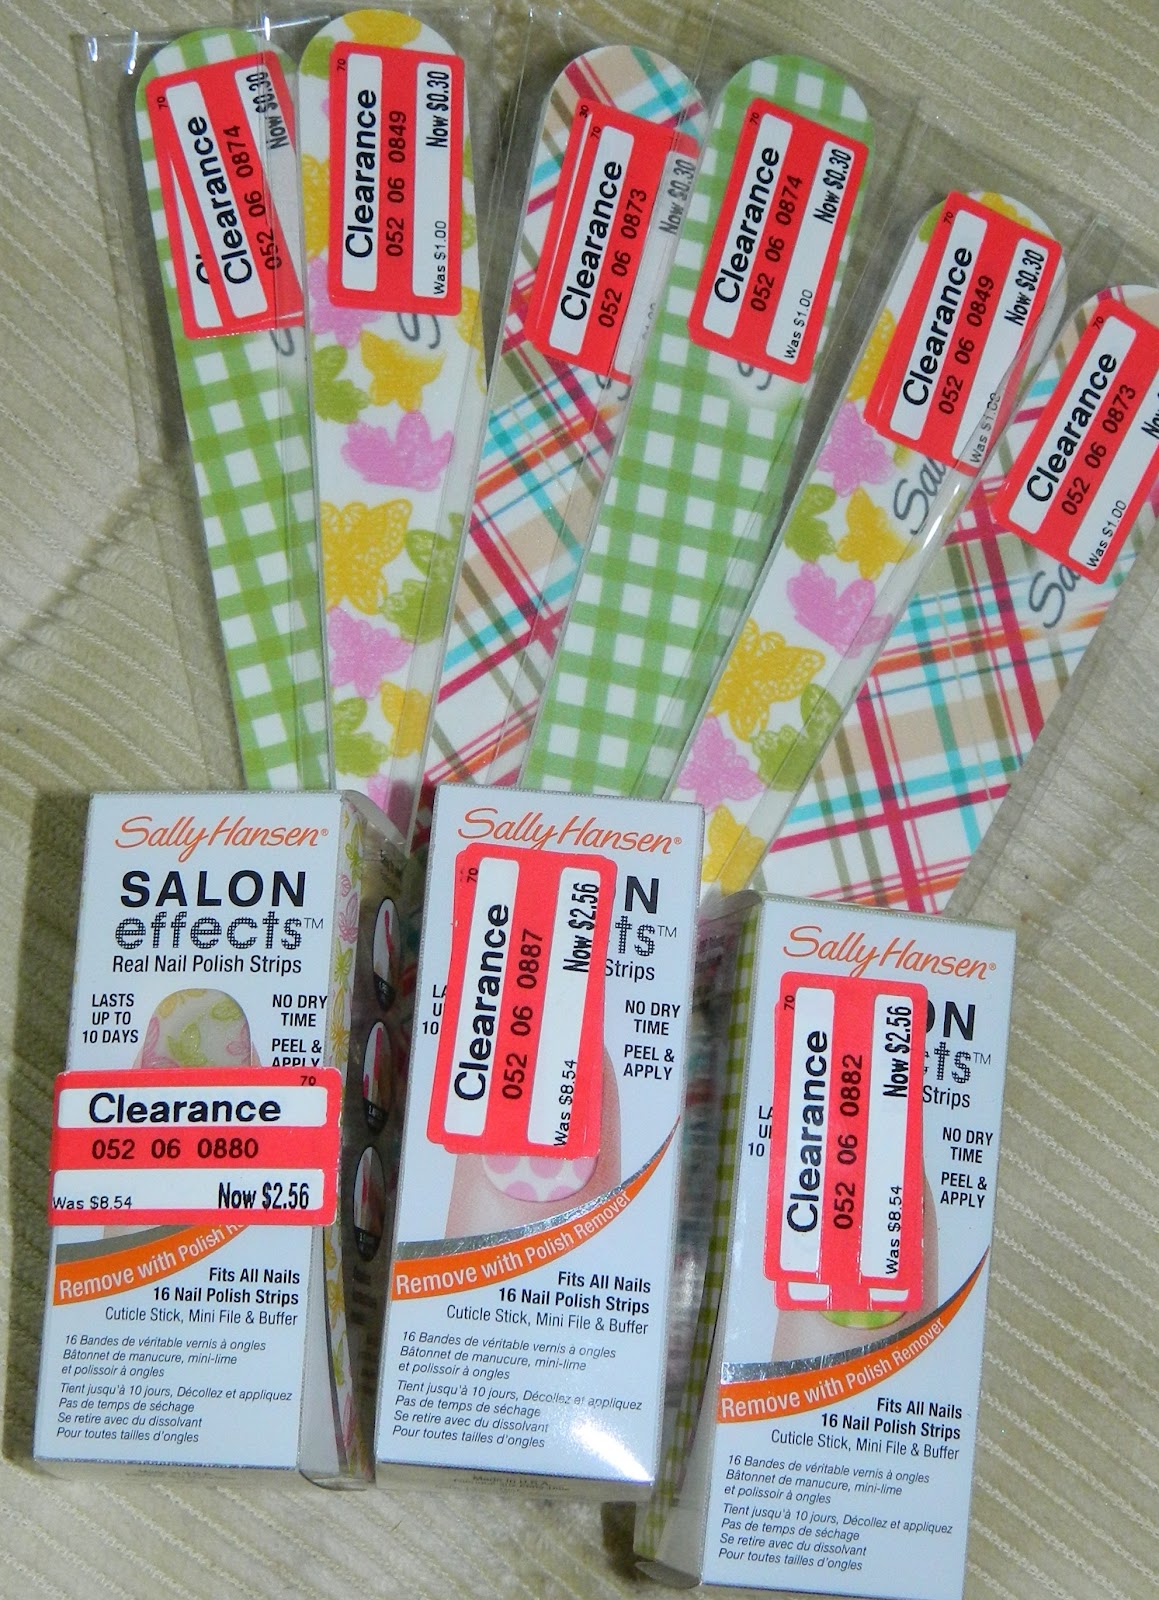 I loved my nail polish strips from KISS that I got in one of my Influenster